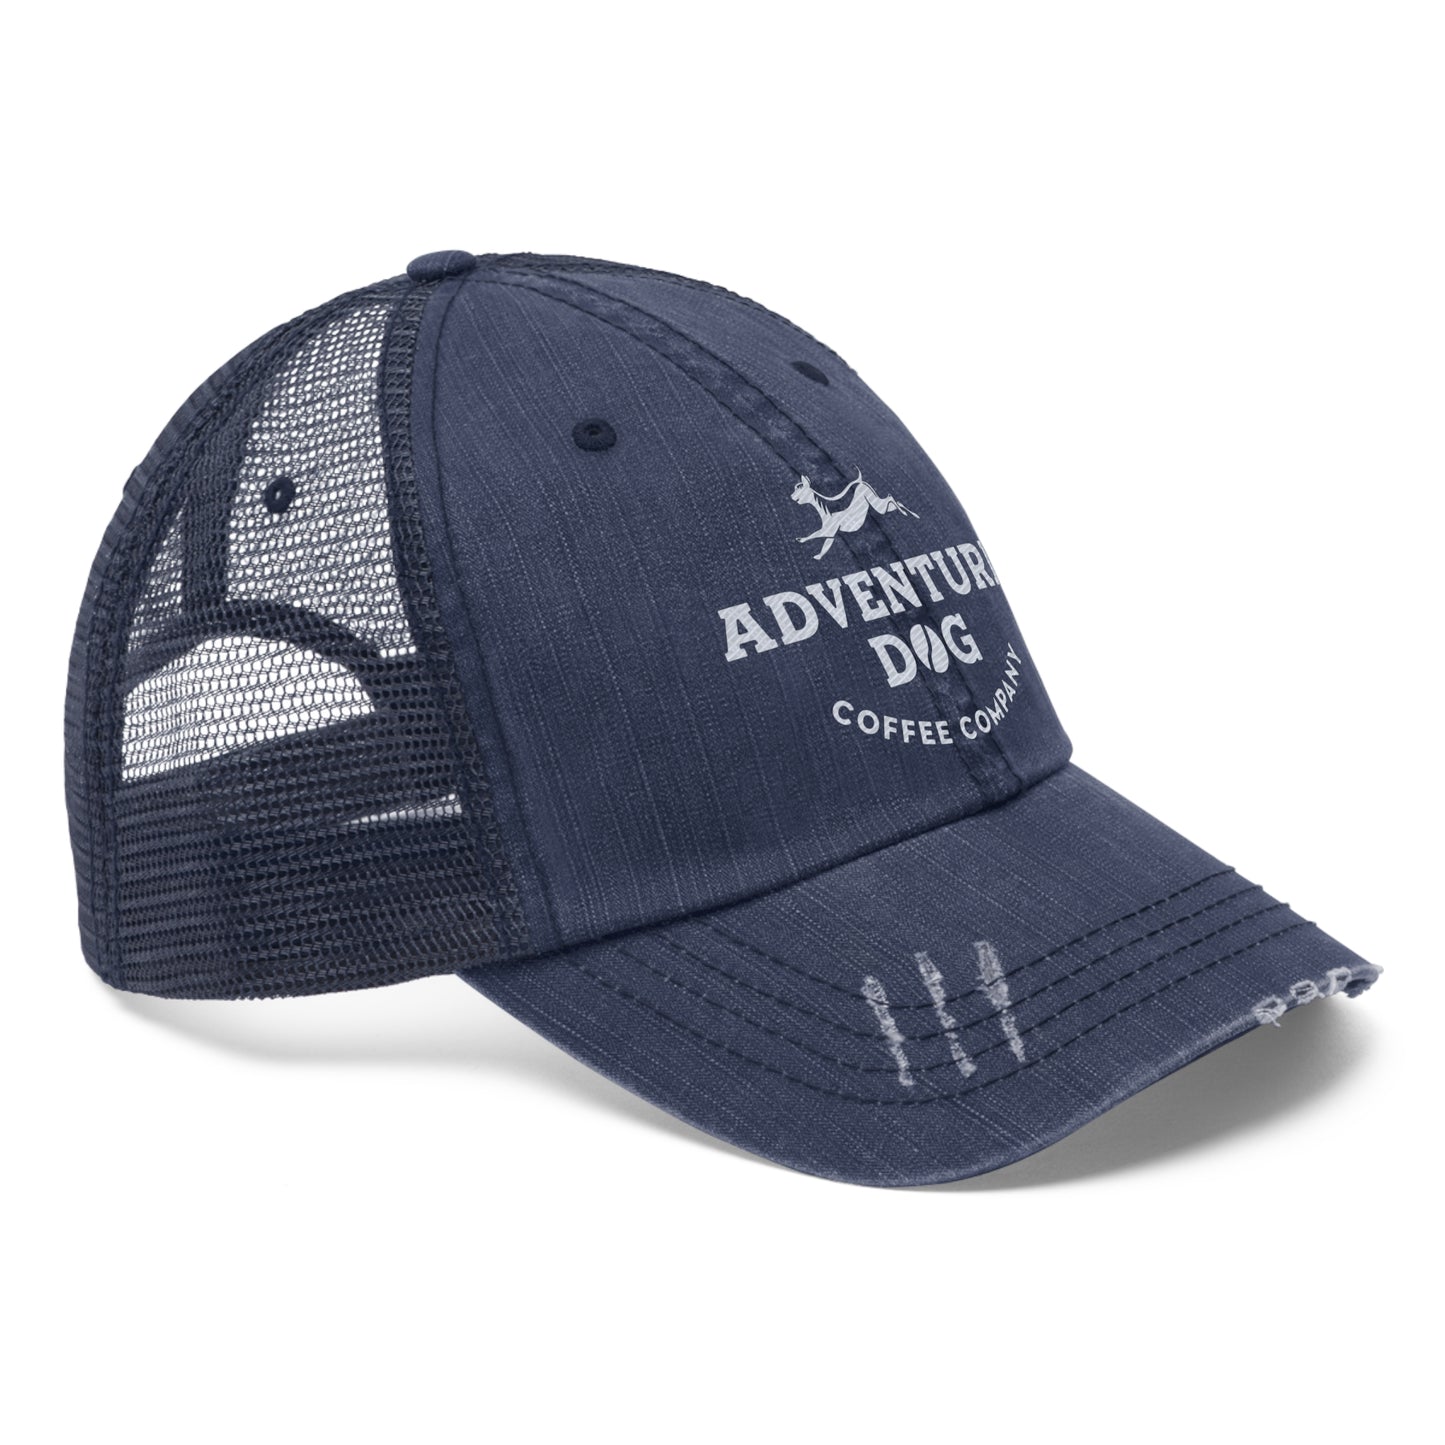 ADCC Vintage Style Trucker Hat